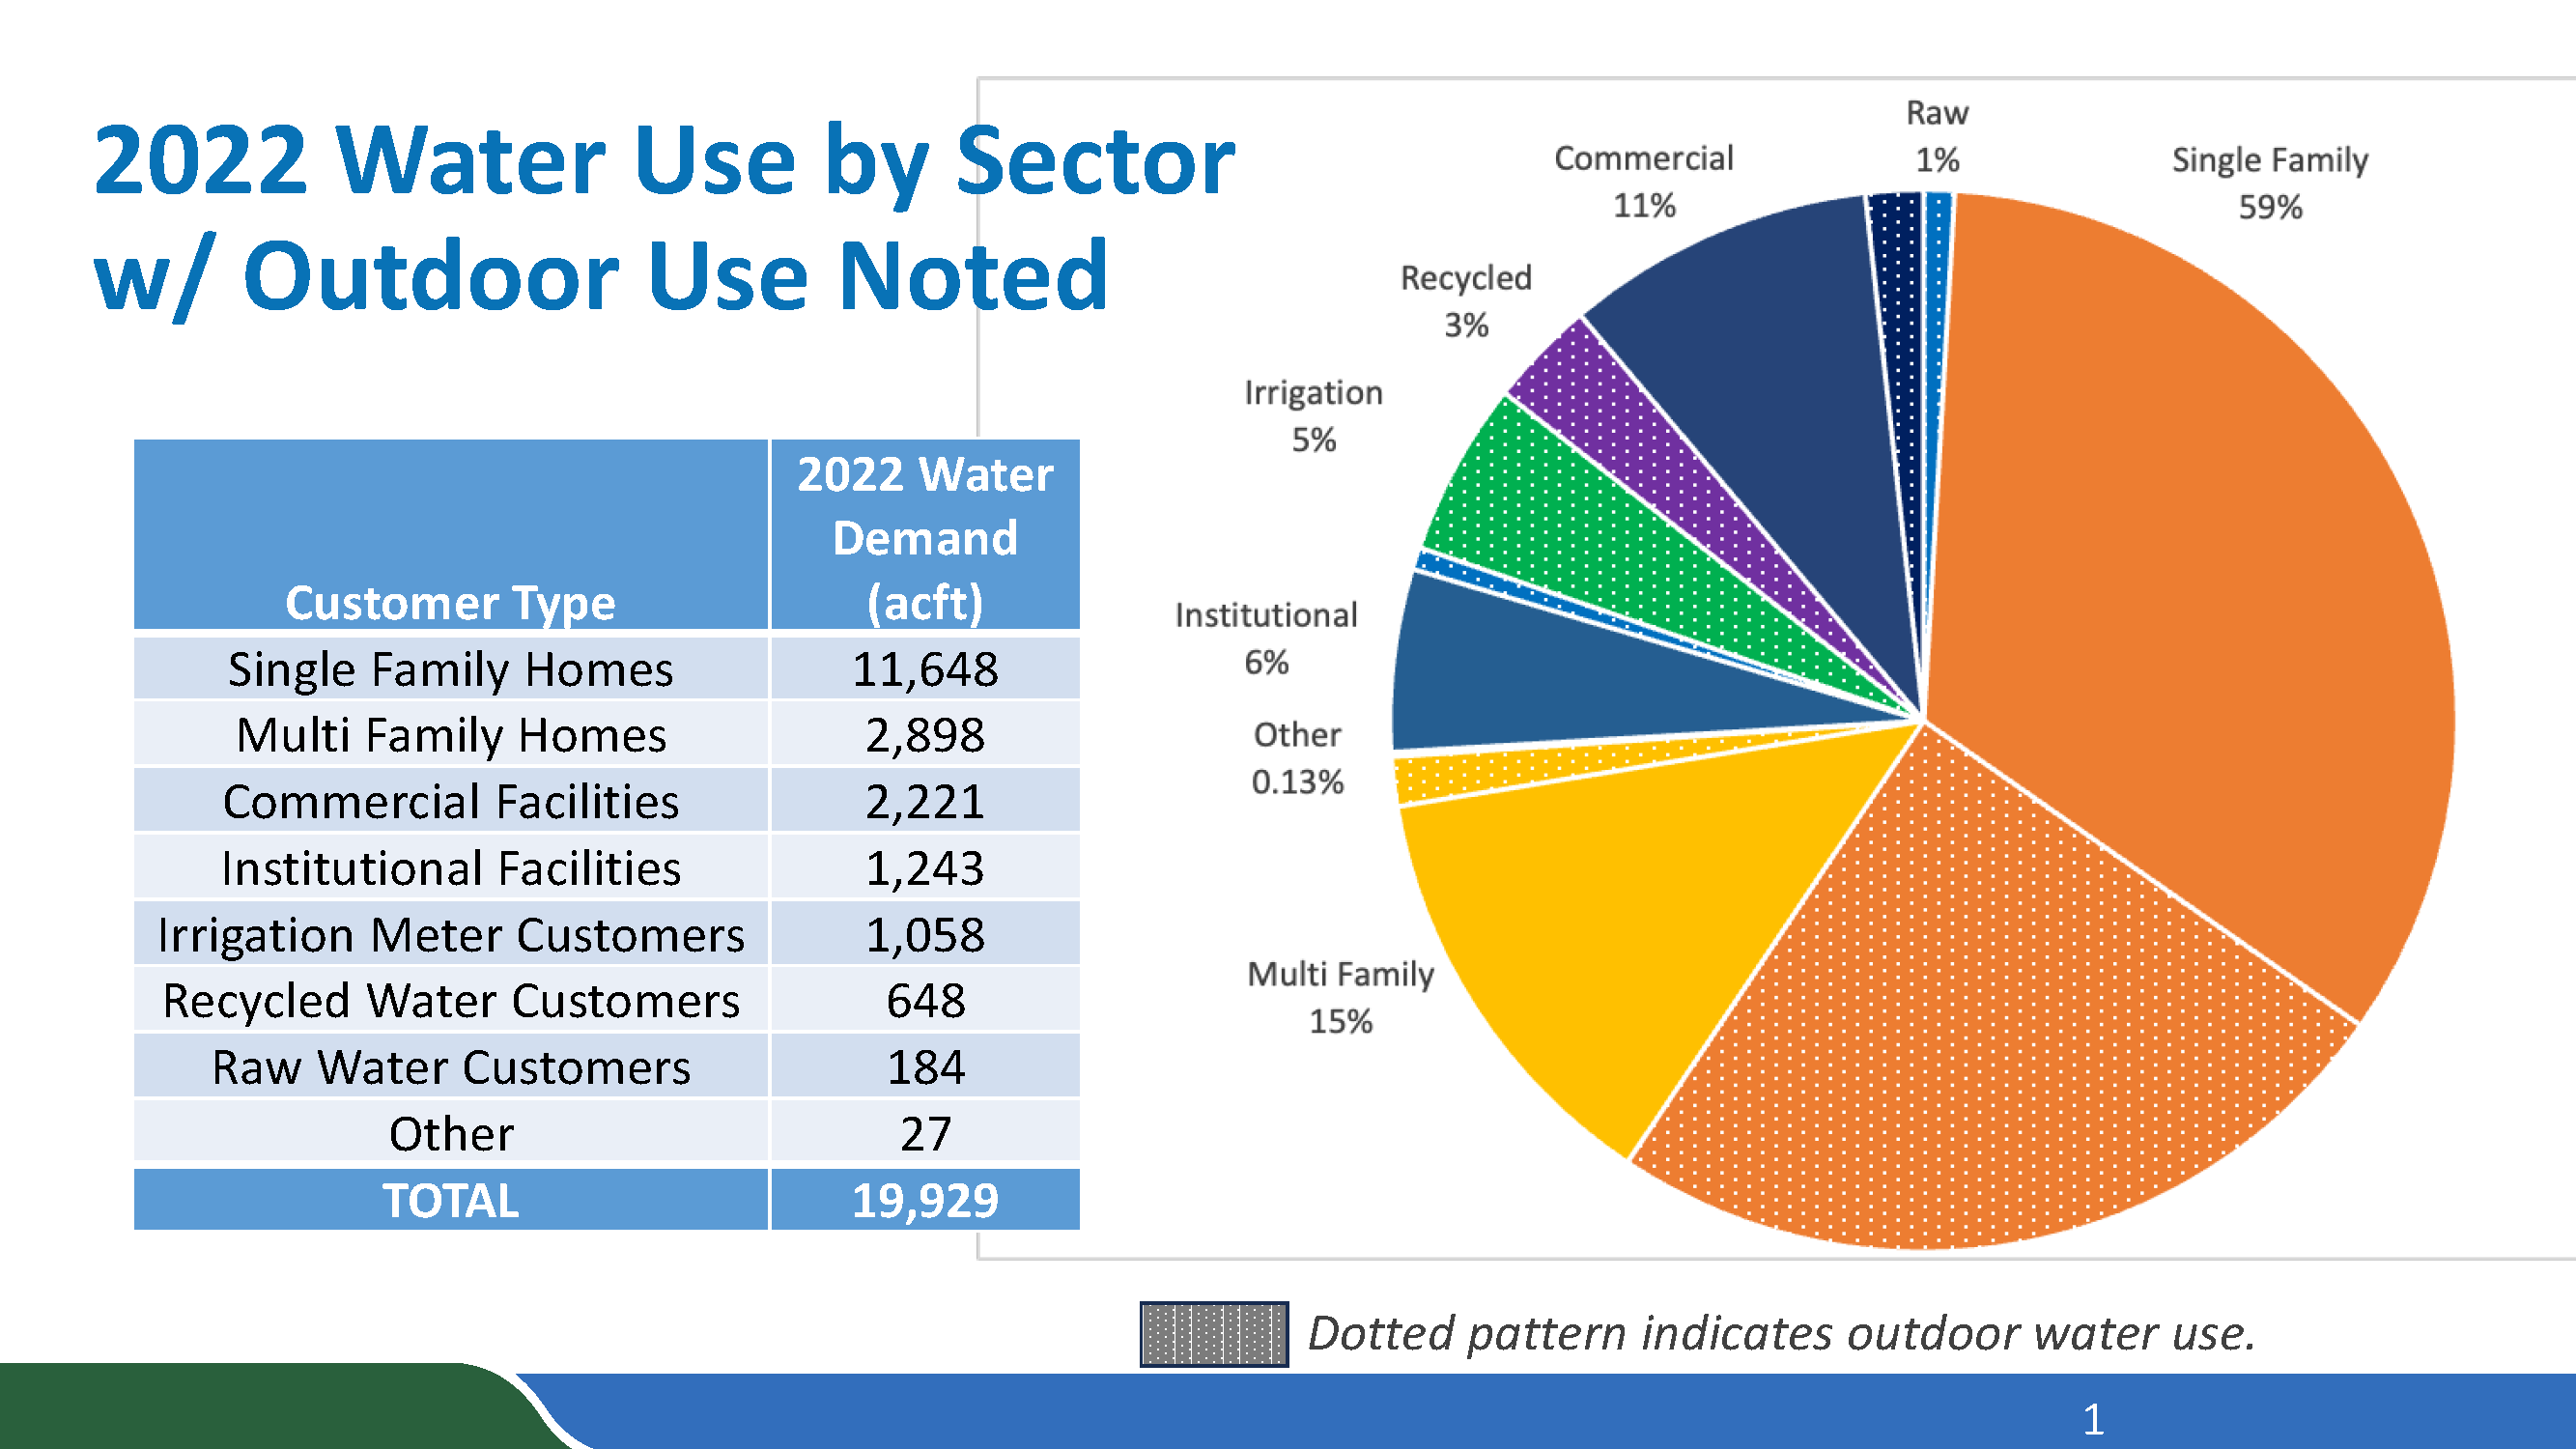 Marin Water Customer Use By Sector with outdoor usage (2021)